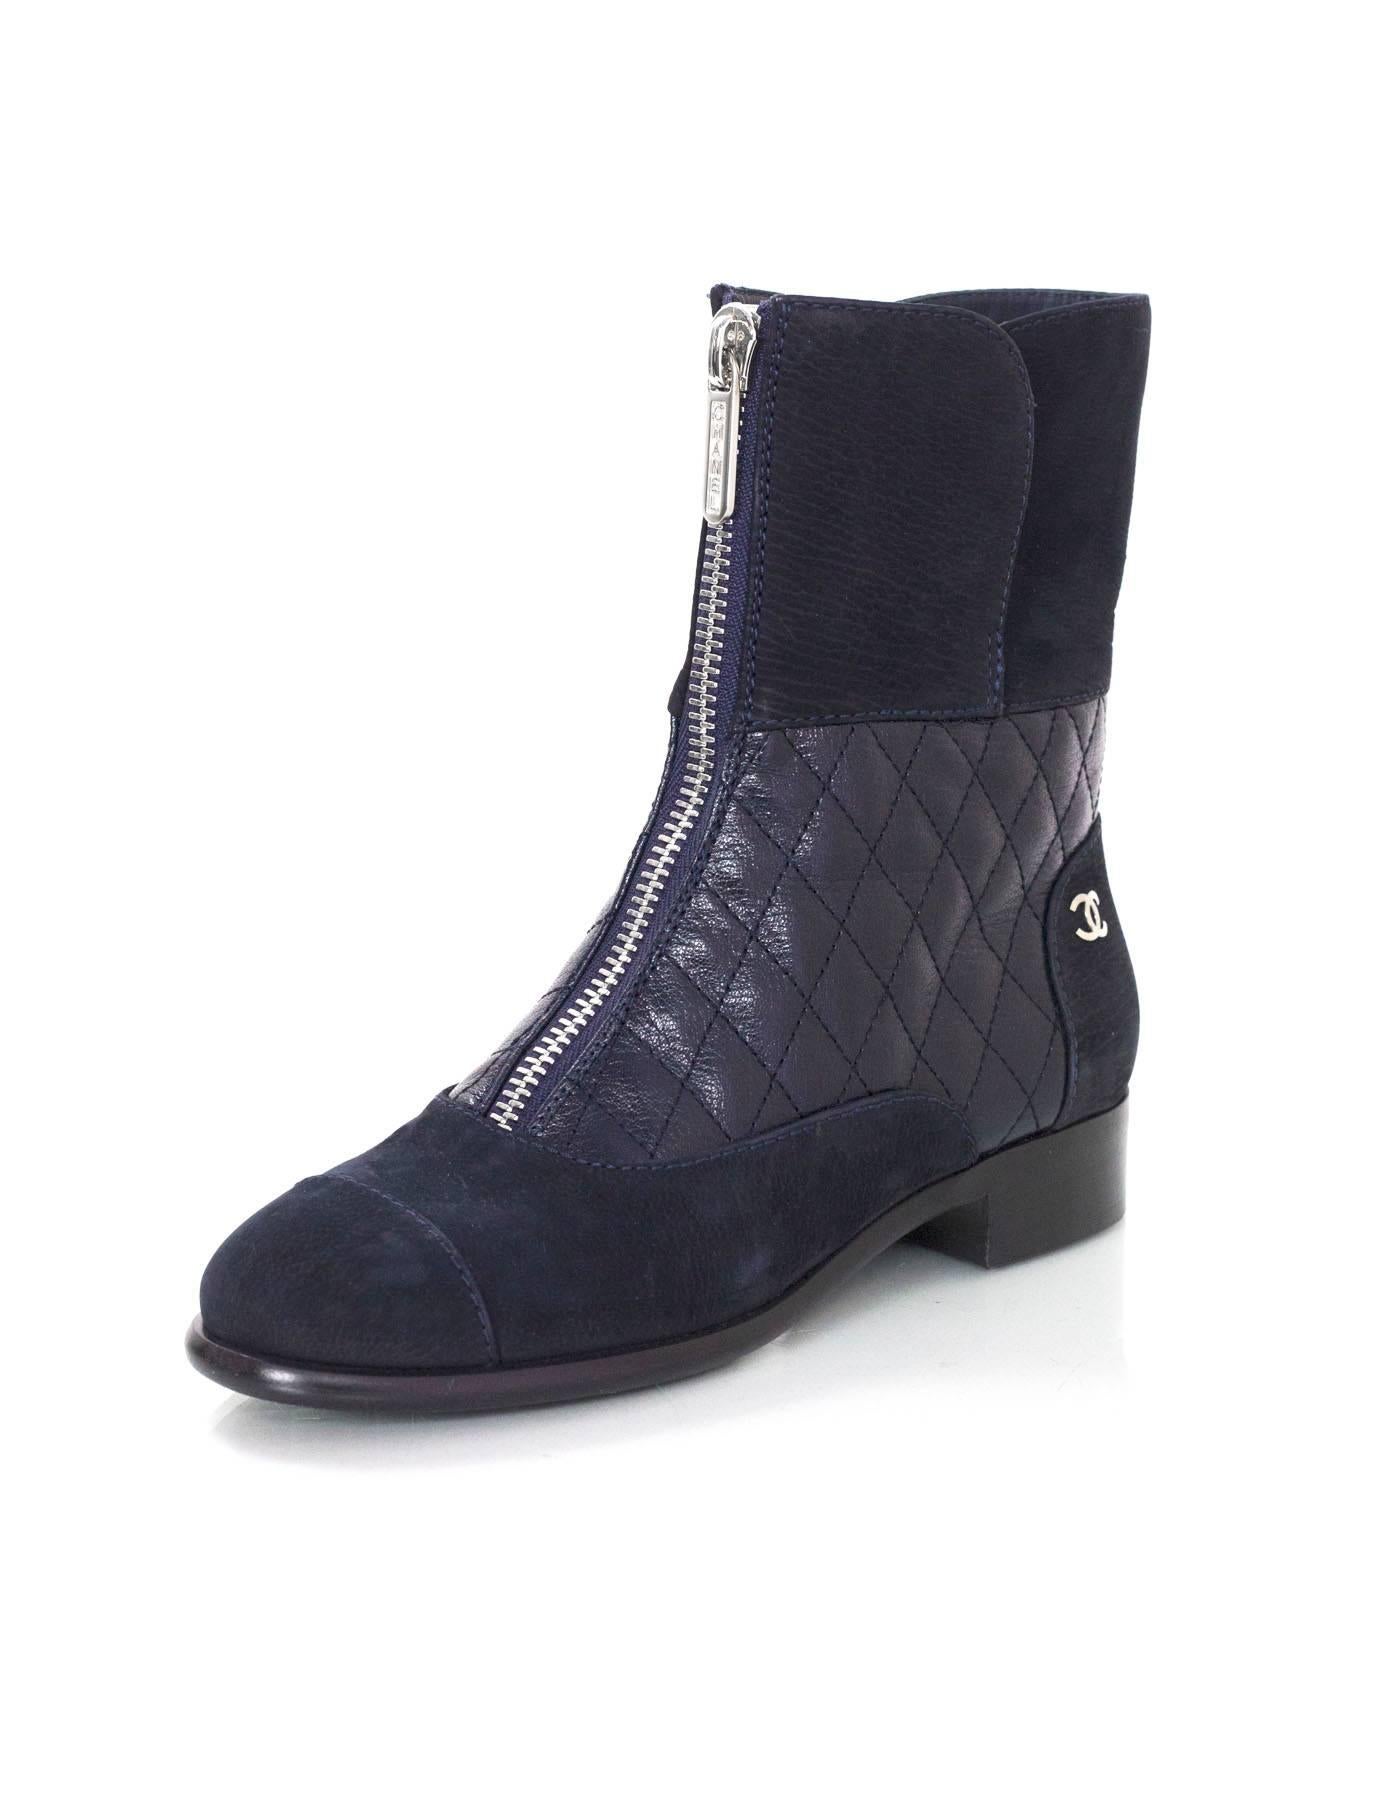 Chanel Navy Suede & Quilted Leather Zip Front Boots
Features small silvertone CC's at outside of heel cap

Made In: Italy
Year of Production: 2016
Color: Navy
Materials: Leather and suede
Closure/Opening: Pull on and zip up front
Sole Stamp: CC